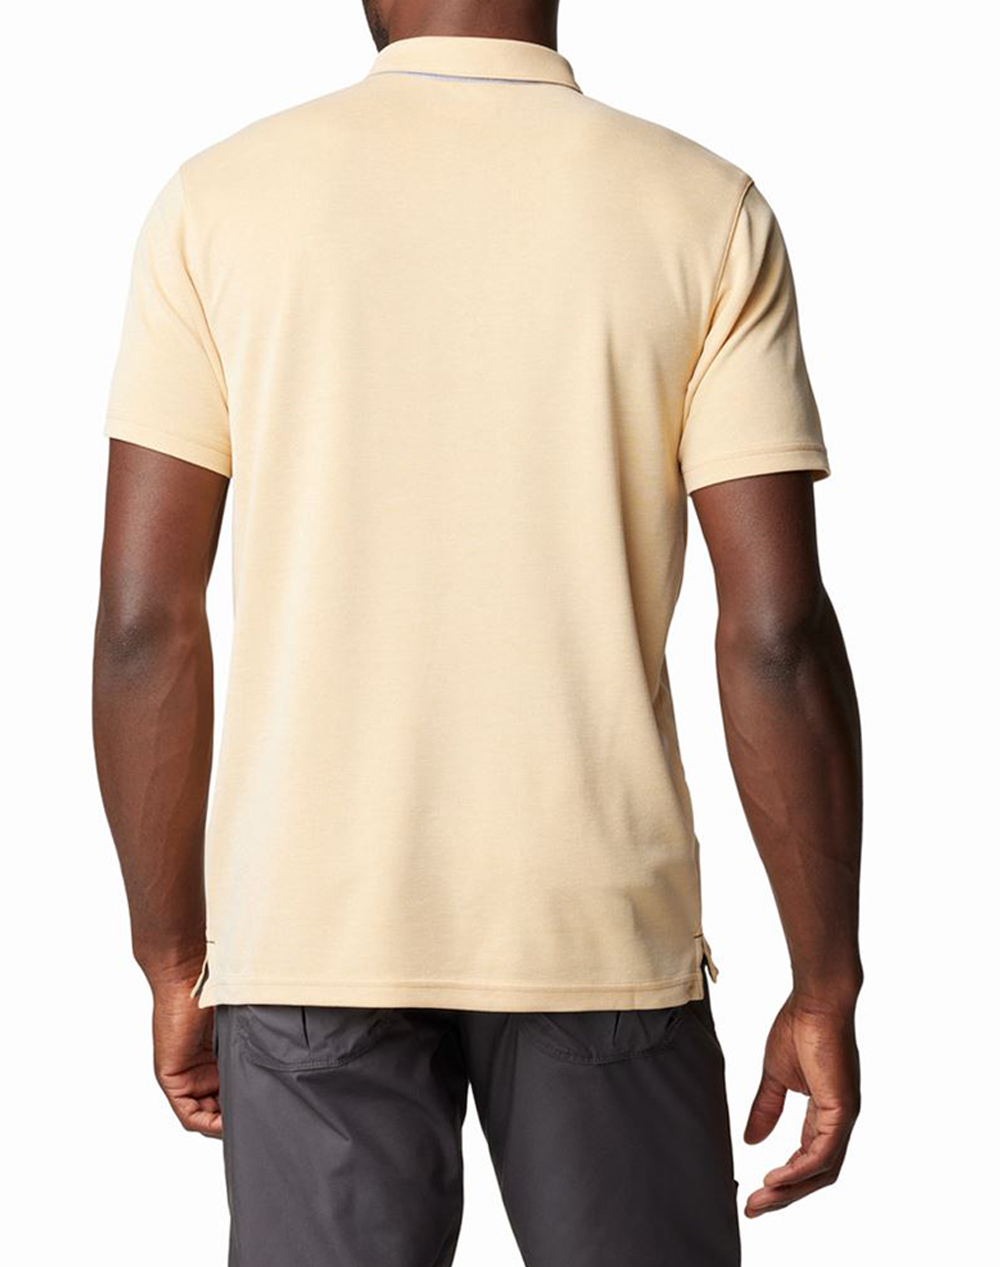 COLUMBIA Mens Nelson Point™ Polo